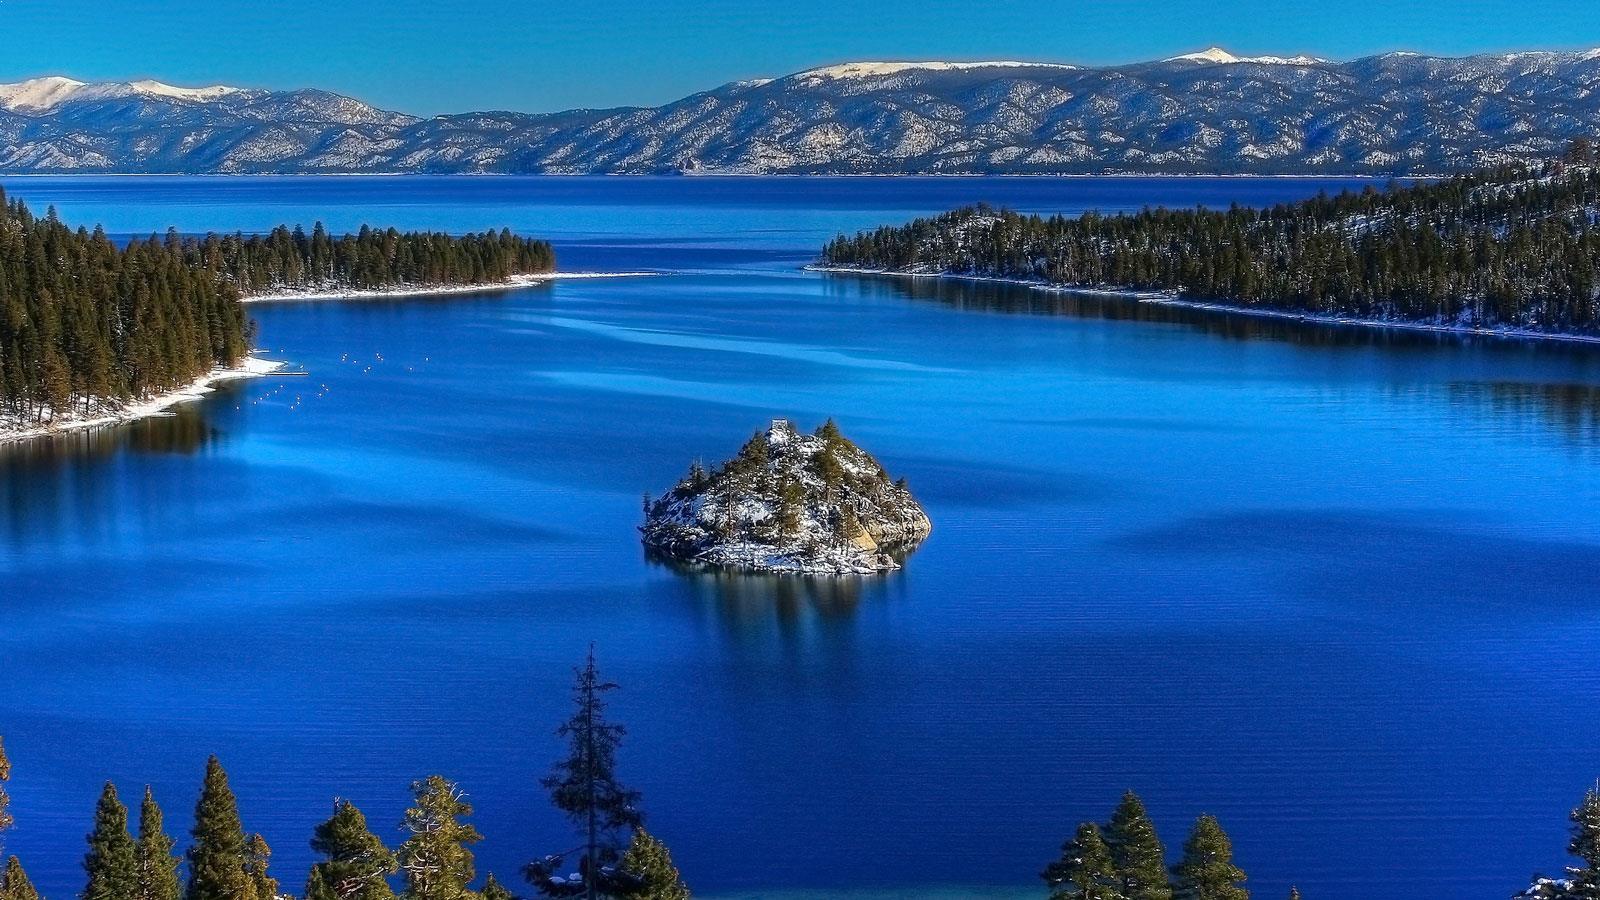 Ariel Picture of Lake Tahoe during the summer